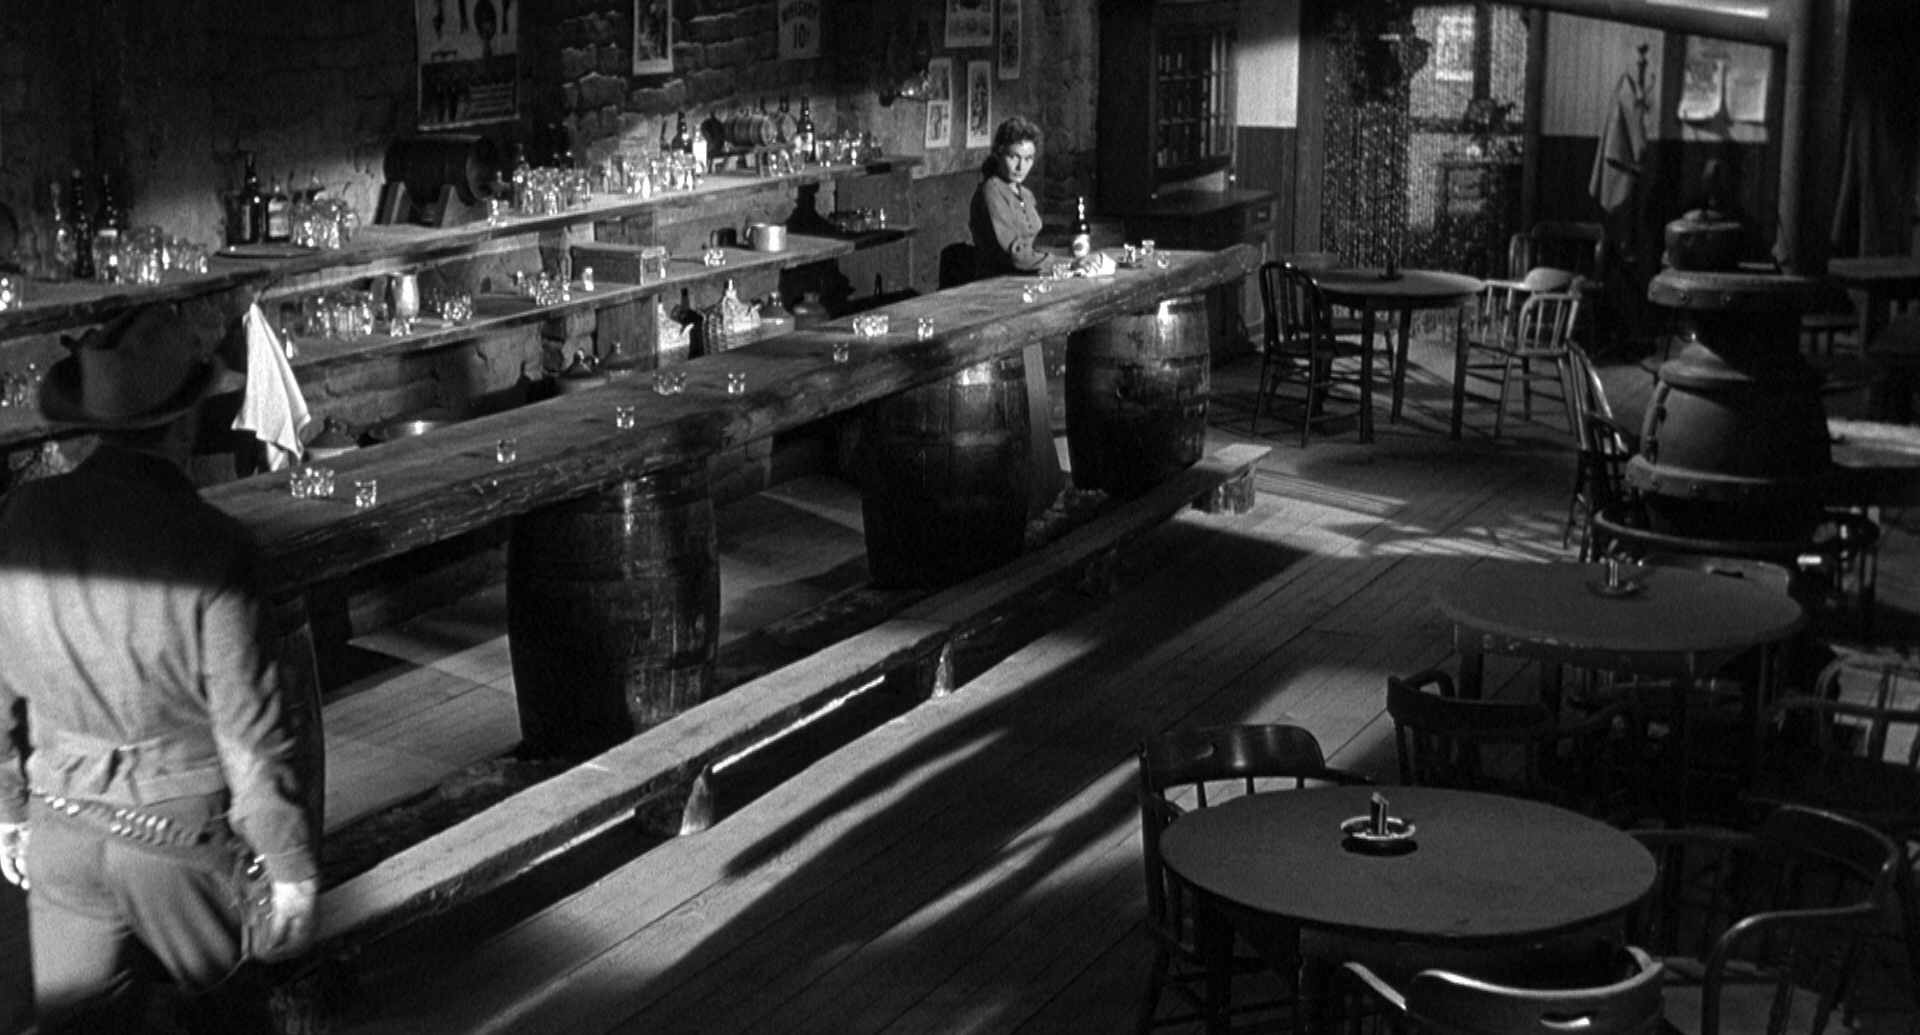 Expressionistic black and white scene in which a cowboy enters a saloon empty except for the bartender; you can’t see his face, she is looking at him from across the room.